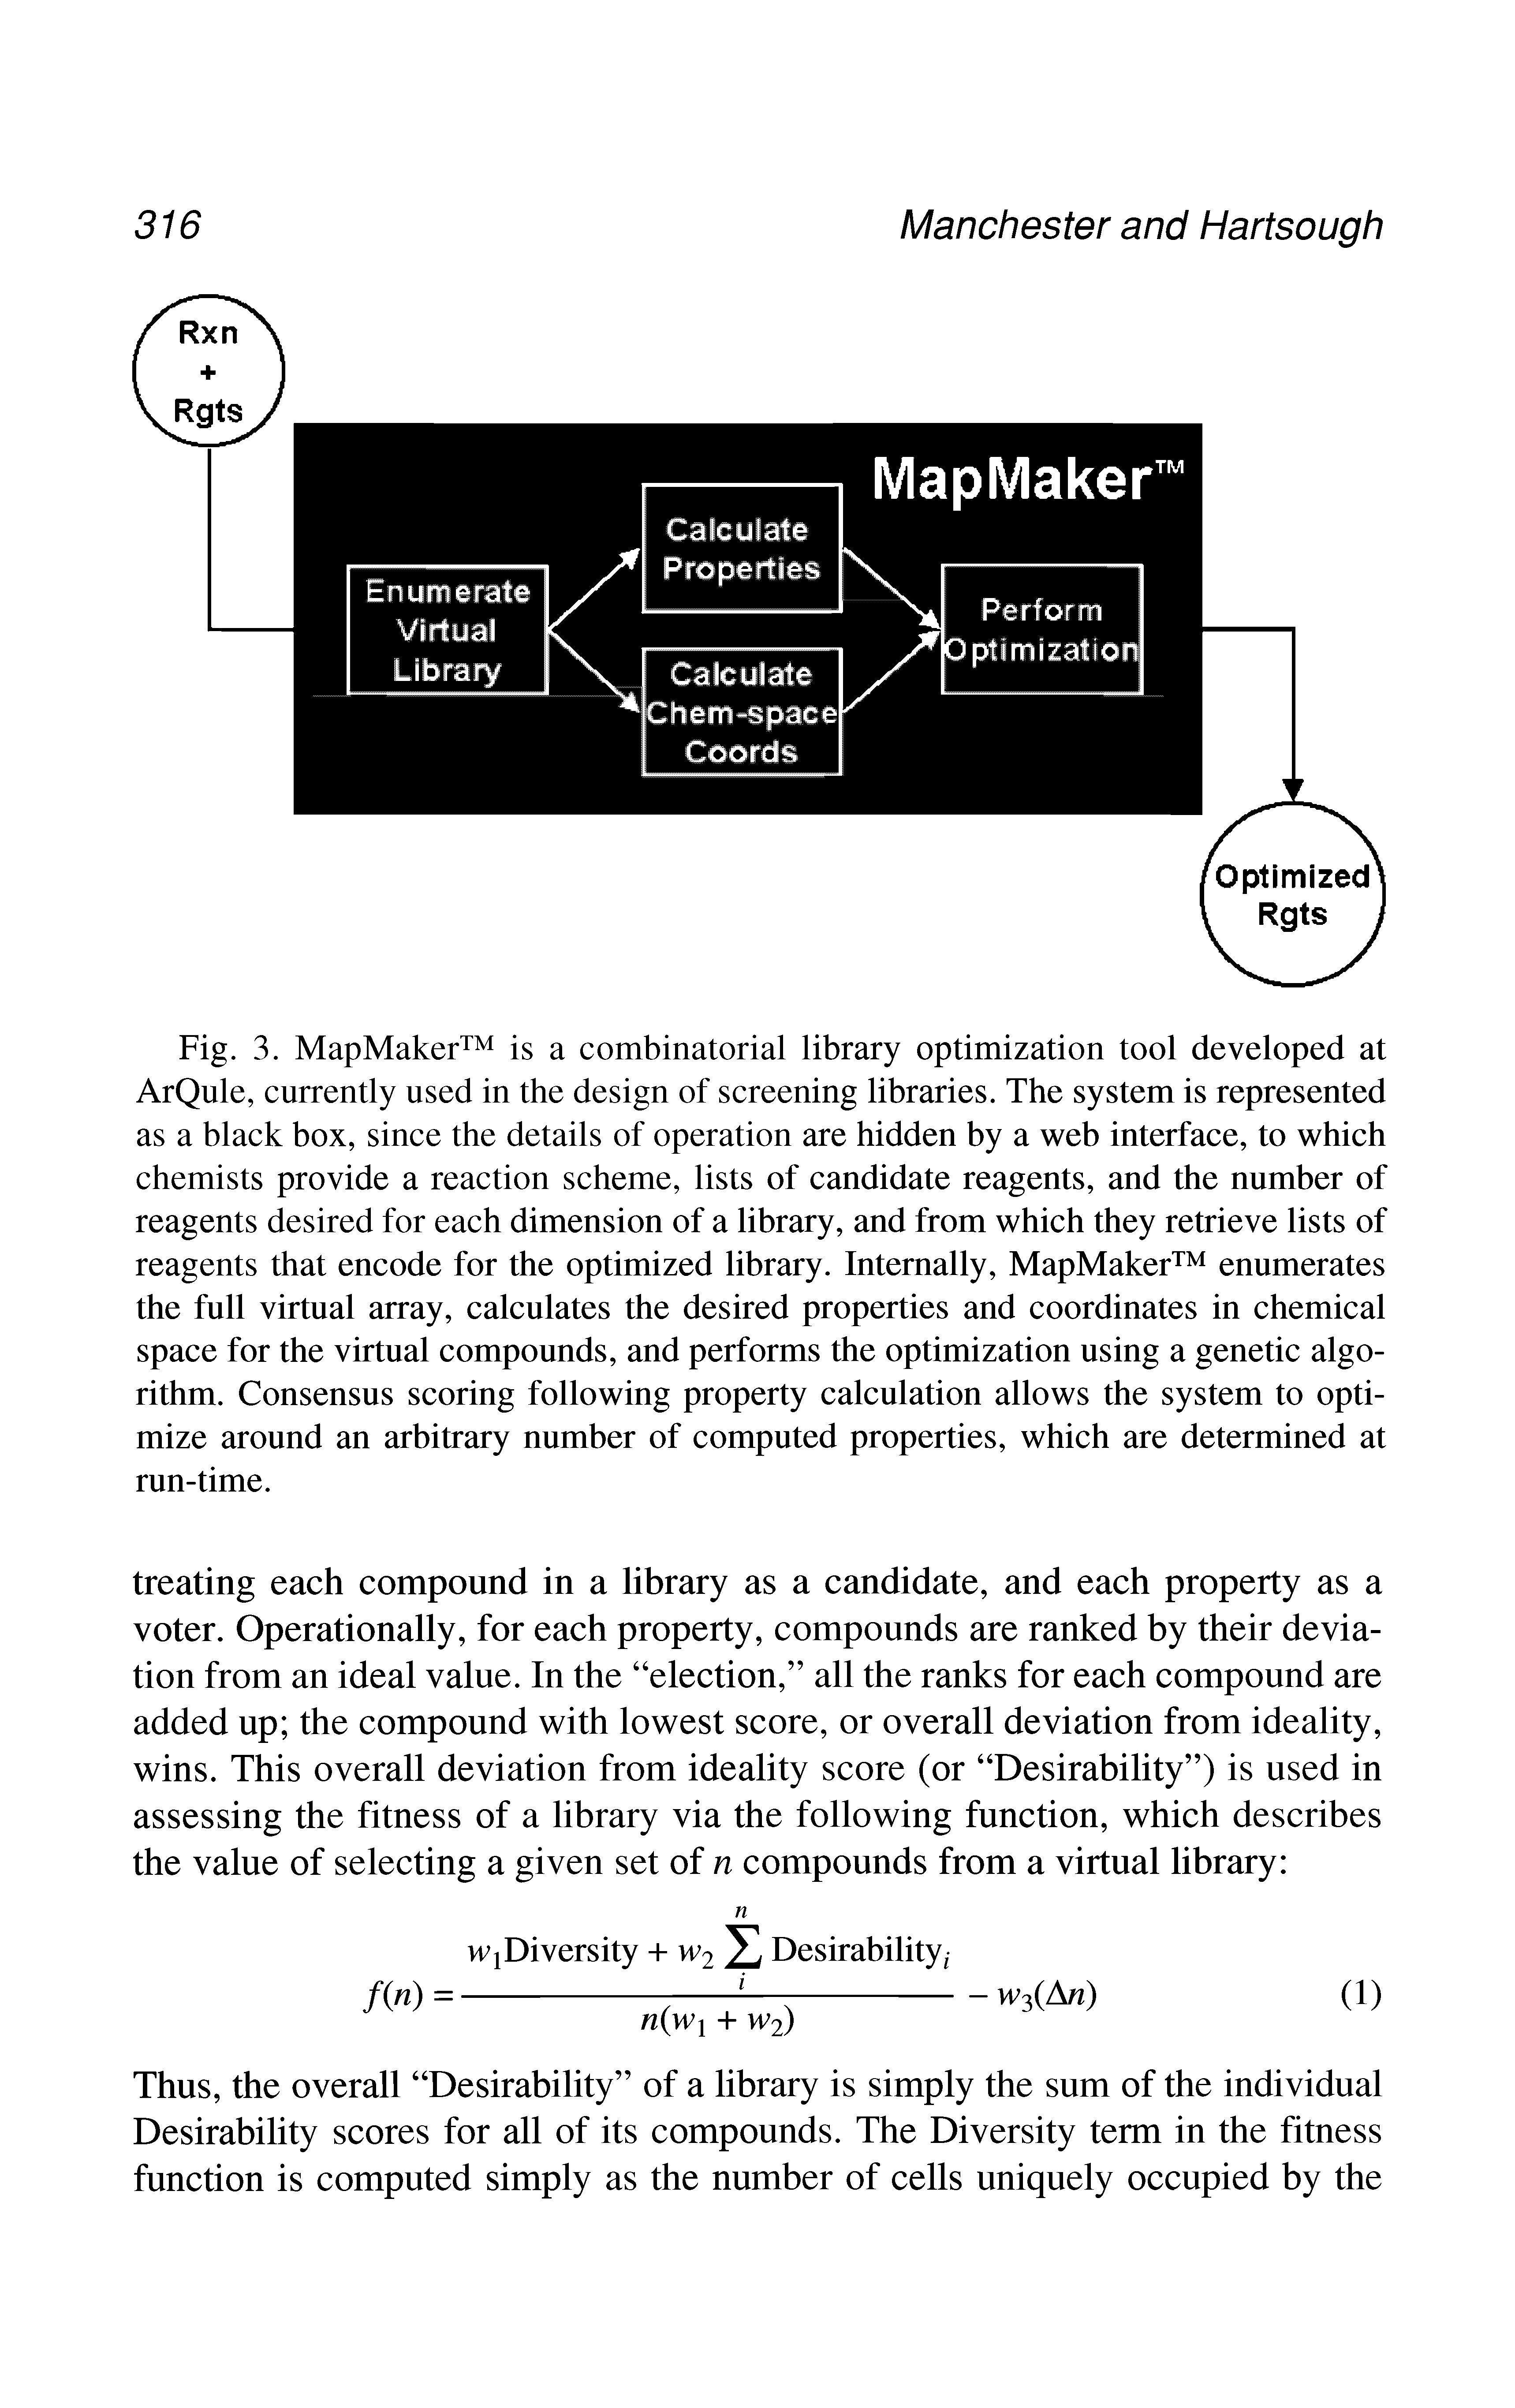 Fig. 3. MapMaker is a combinatorial library optimization tool developed at ArQule, currently used in the design of screening libraries. The system is represented as a black box, since the details of operation are hidden by a web interface, to which chemists provide a reaction scheme, lists of candidate reagents, and the number of reagents desired for each dimension of a library, and from which they retrieve lists of reagents that encode for the optimized library. Internally, MapMaker enumerates the full virtual array, calculates the desired properties and coordinates in chemical space for the virtual compounds, and performs the optimization using a genetic algorithm. Consensus scoring following property calculation allows the system to optimize around an arbitrary number of computed properties, which are determined at run-time.